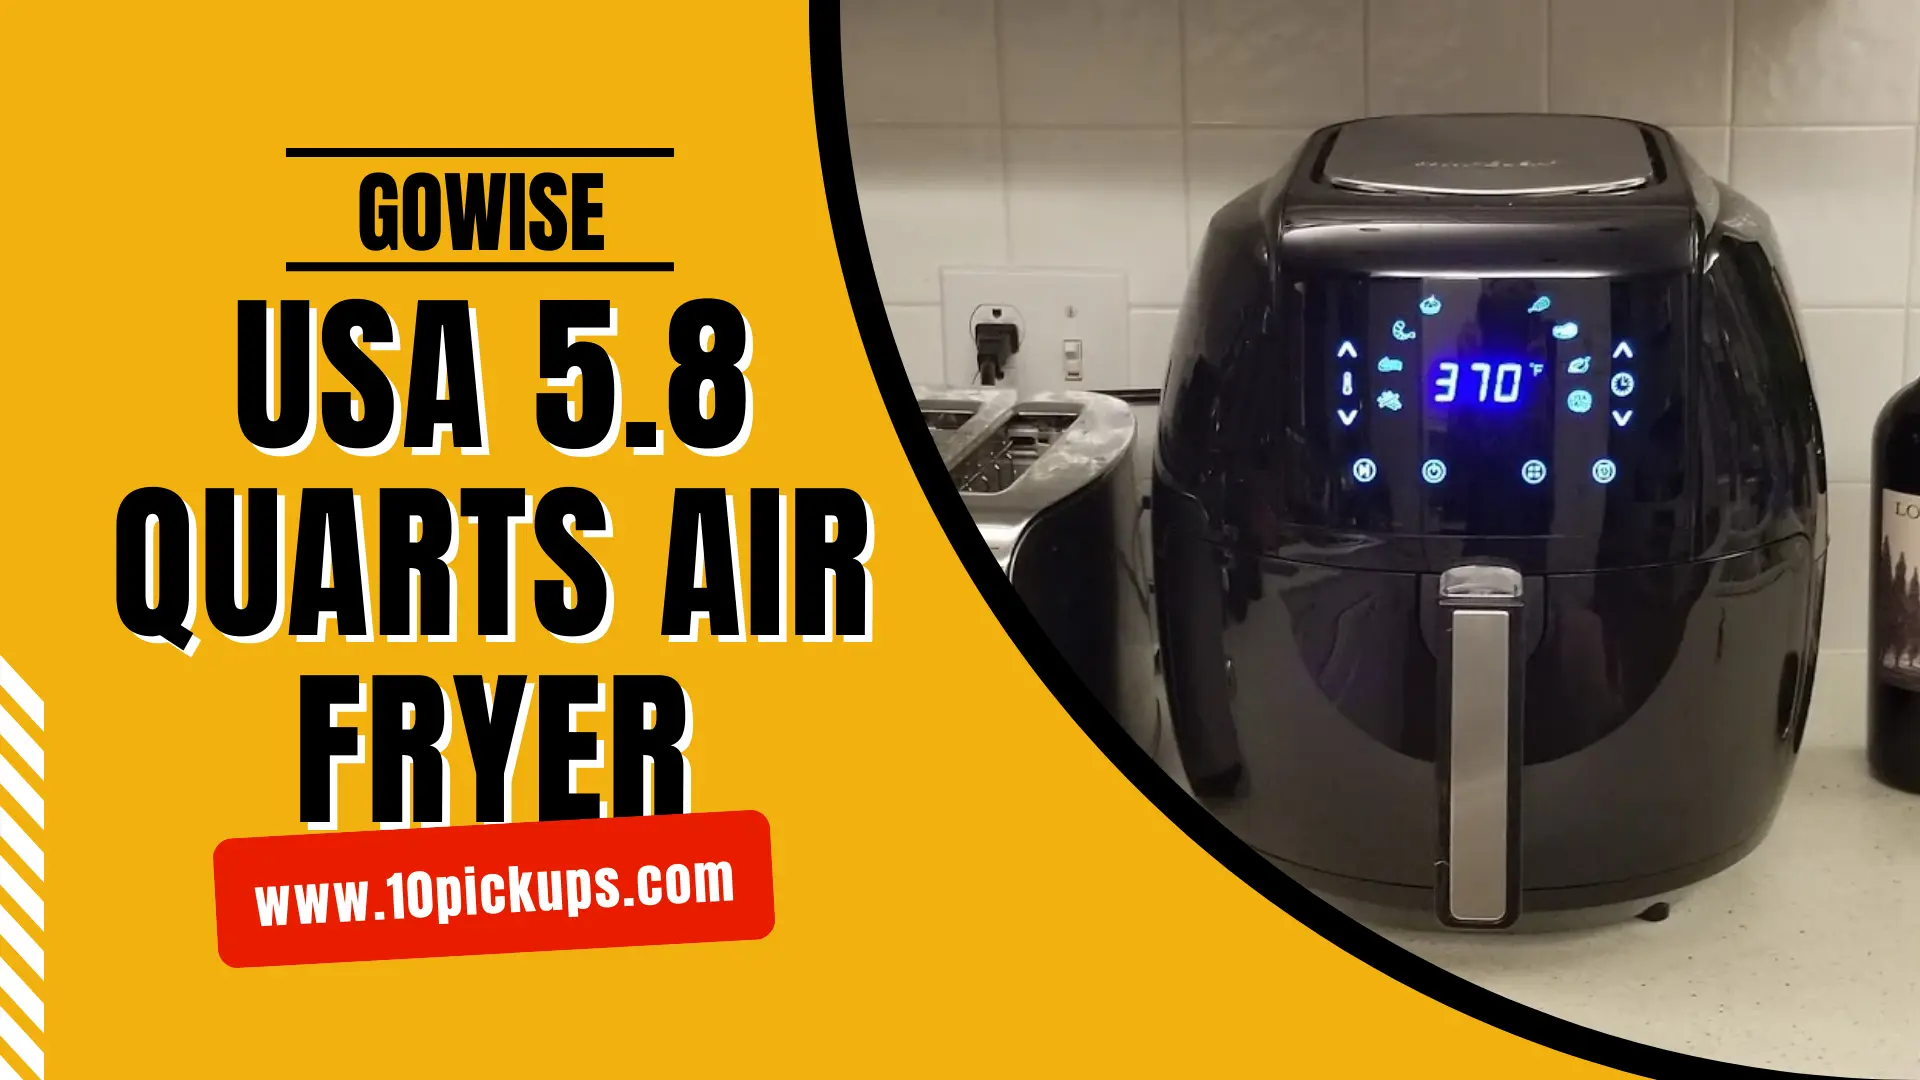 GoWISE USA 5.8 Quarts Air Fryer